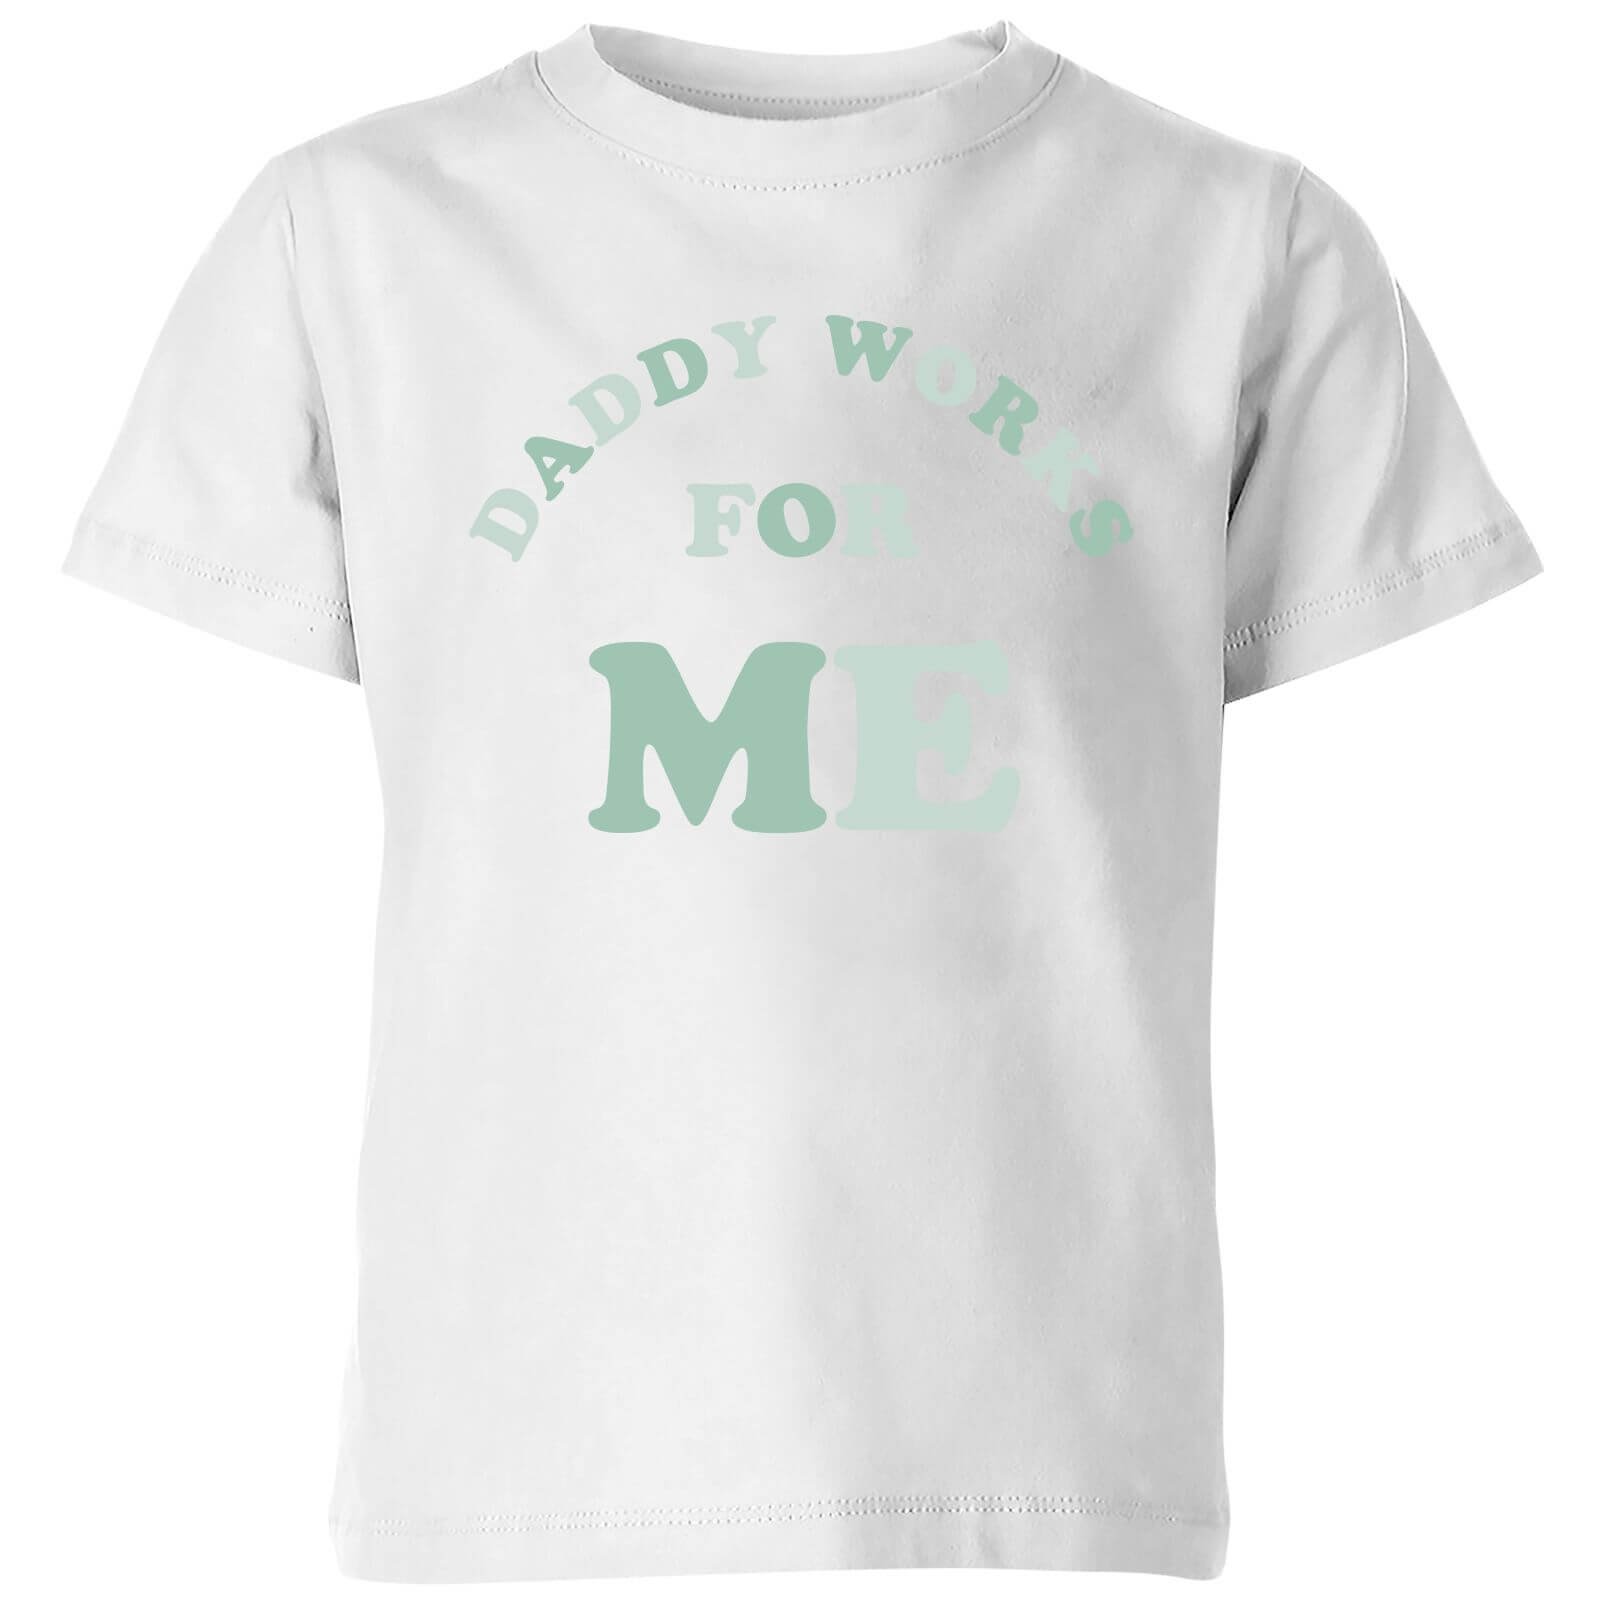 My Little Rascal Daddy Works For Me Kids' T-Shirt - White - 3-4 Years - White